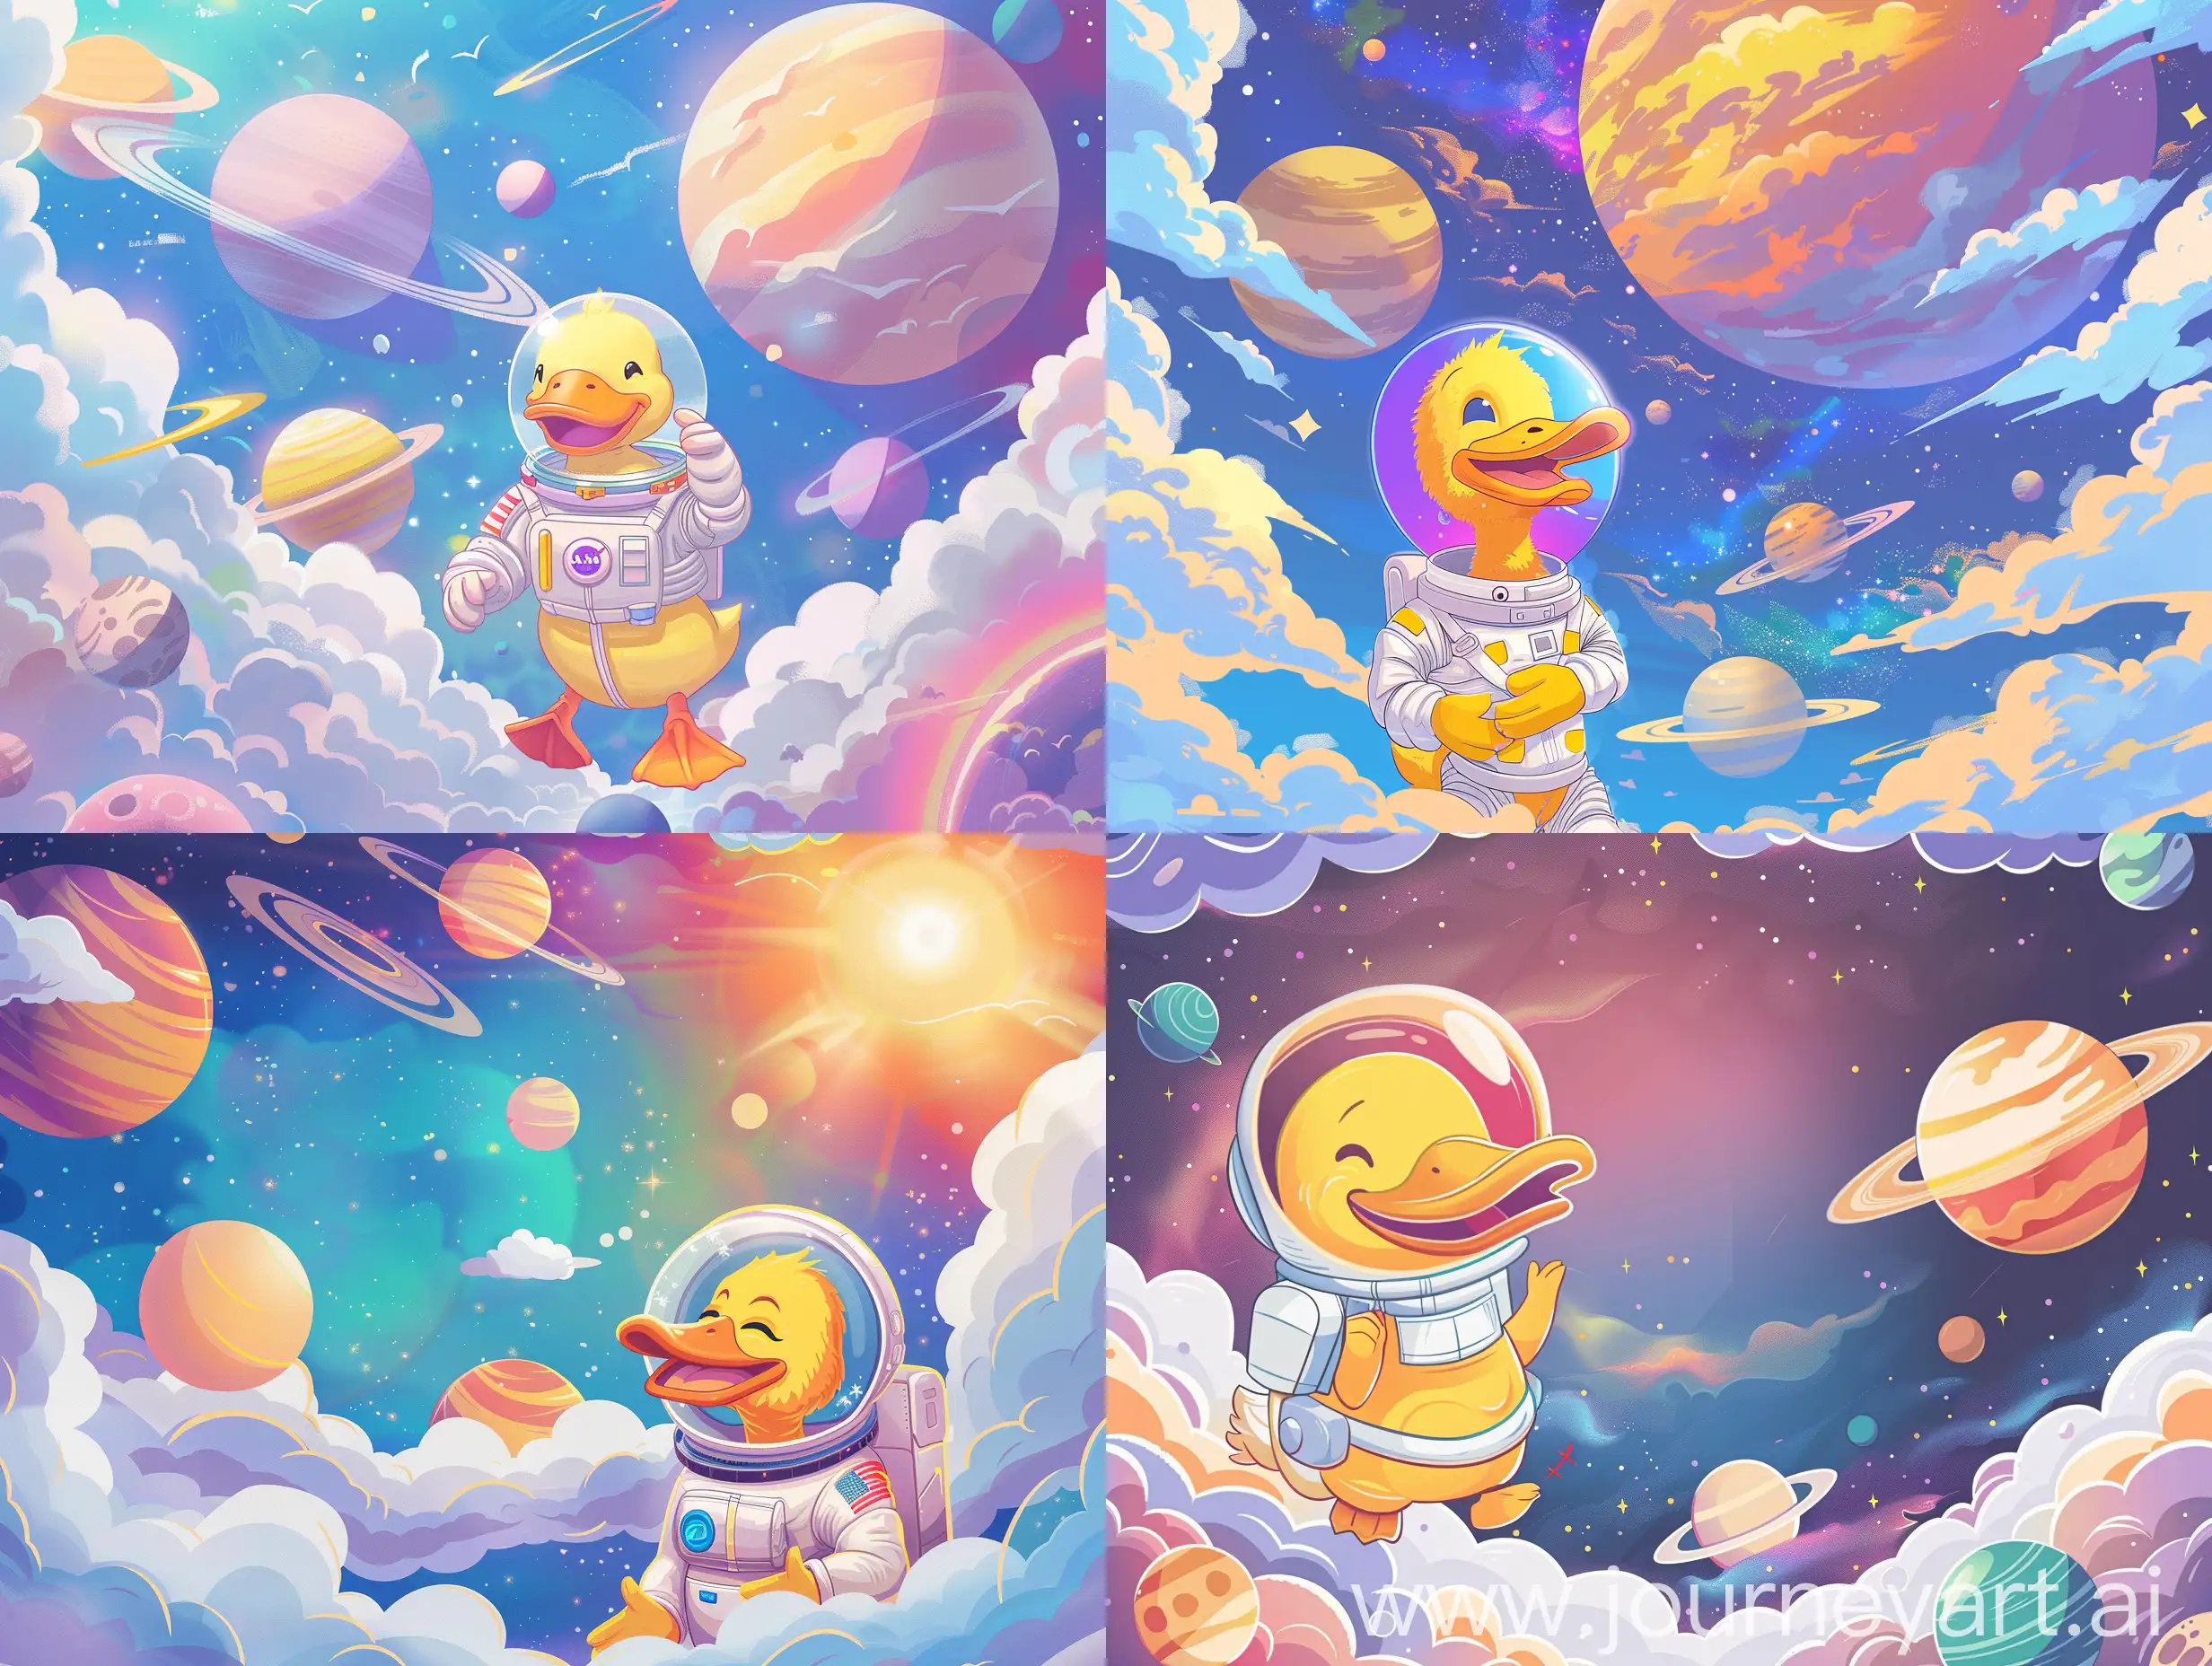 Cheerful-Astronaut-Duck-in-Vibrant-Space-Landscape